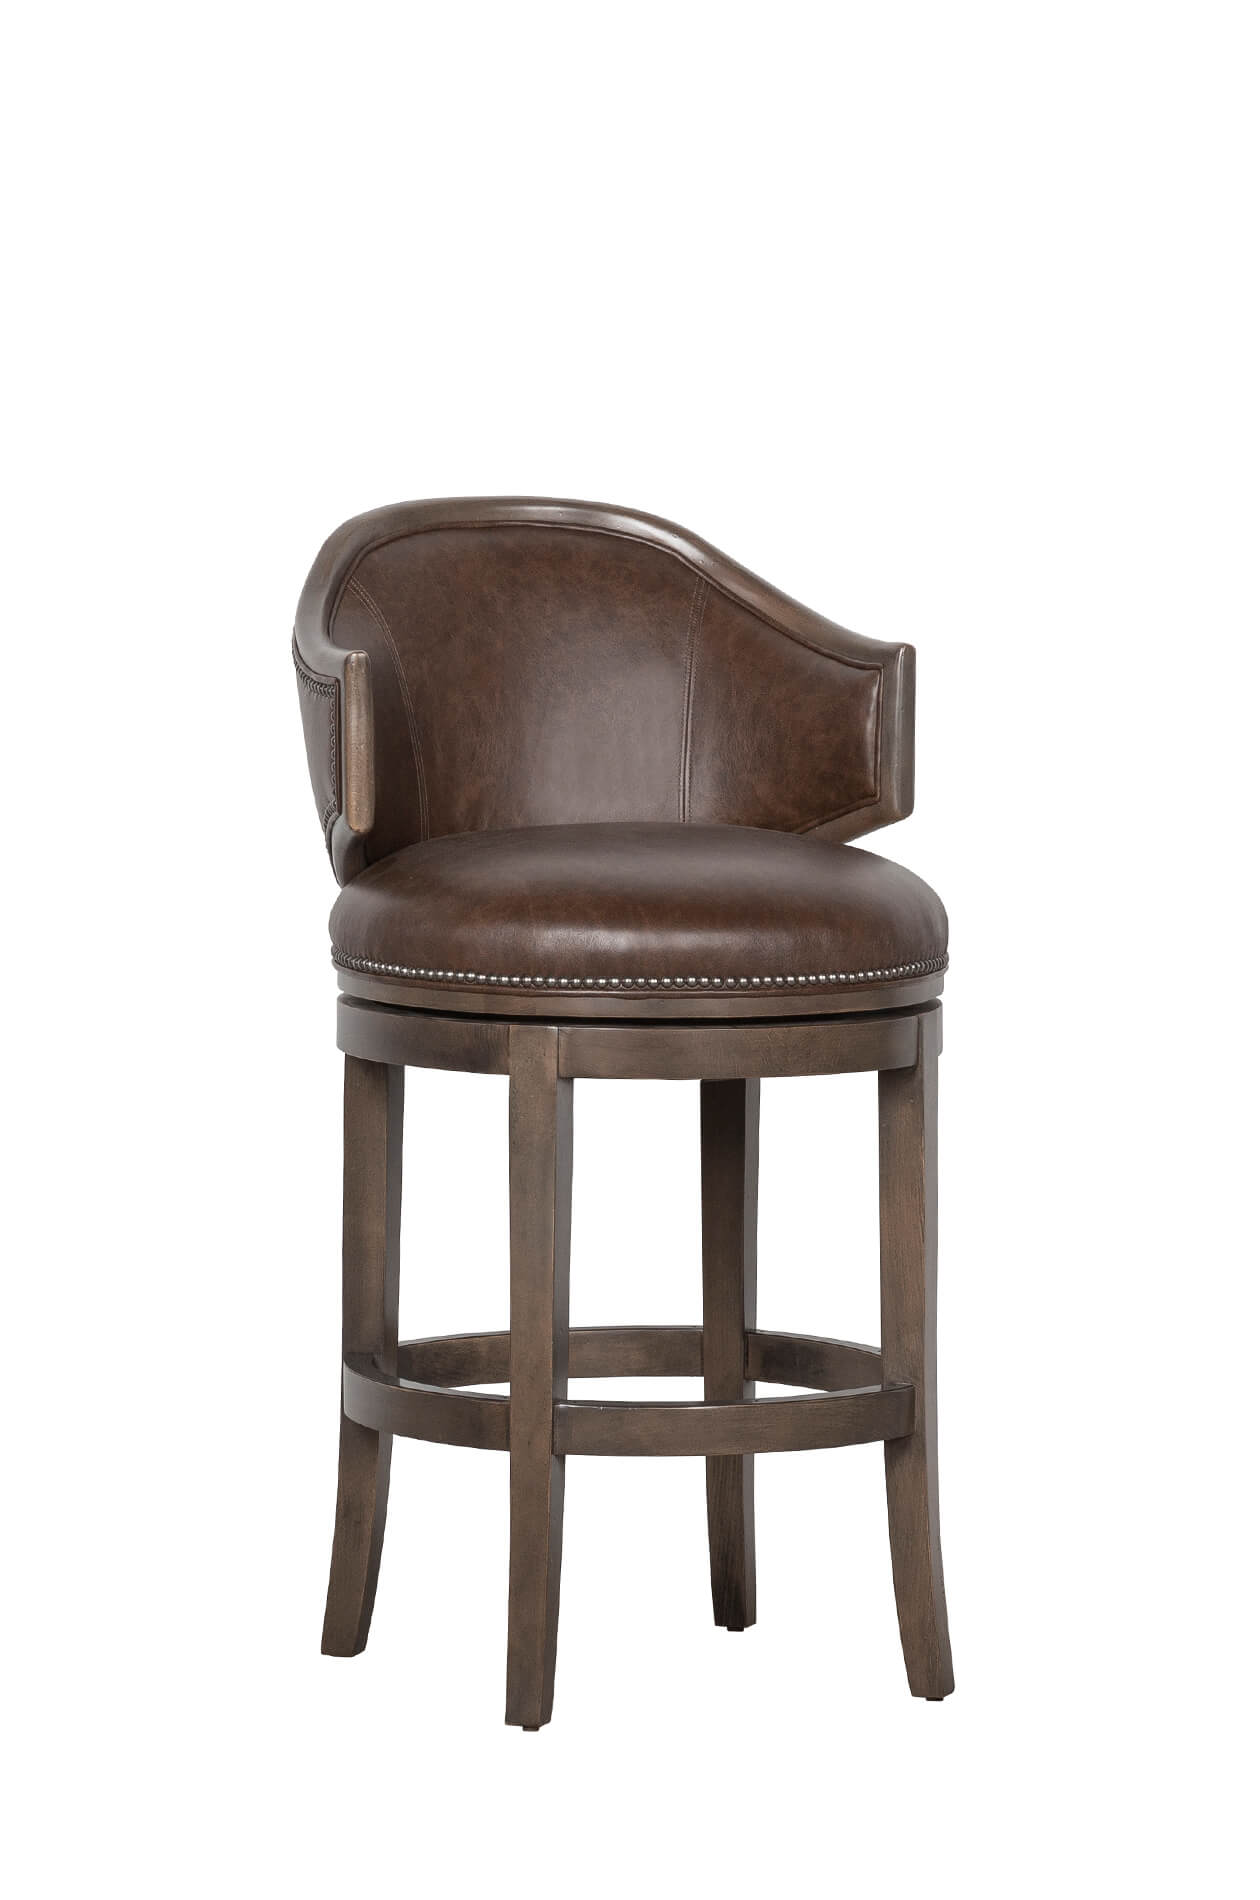 Upholstered Wood Swivel Stool, Leather Swivel Bar Stools With Backs And Arms